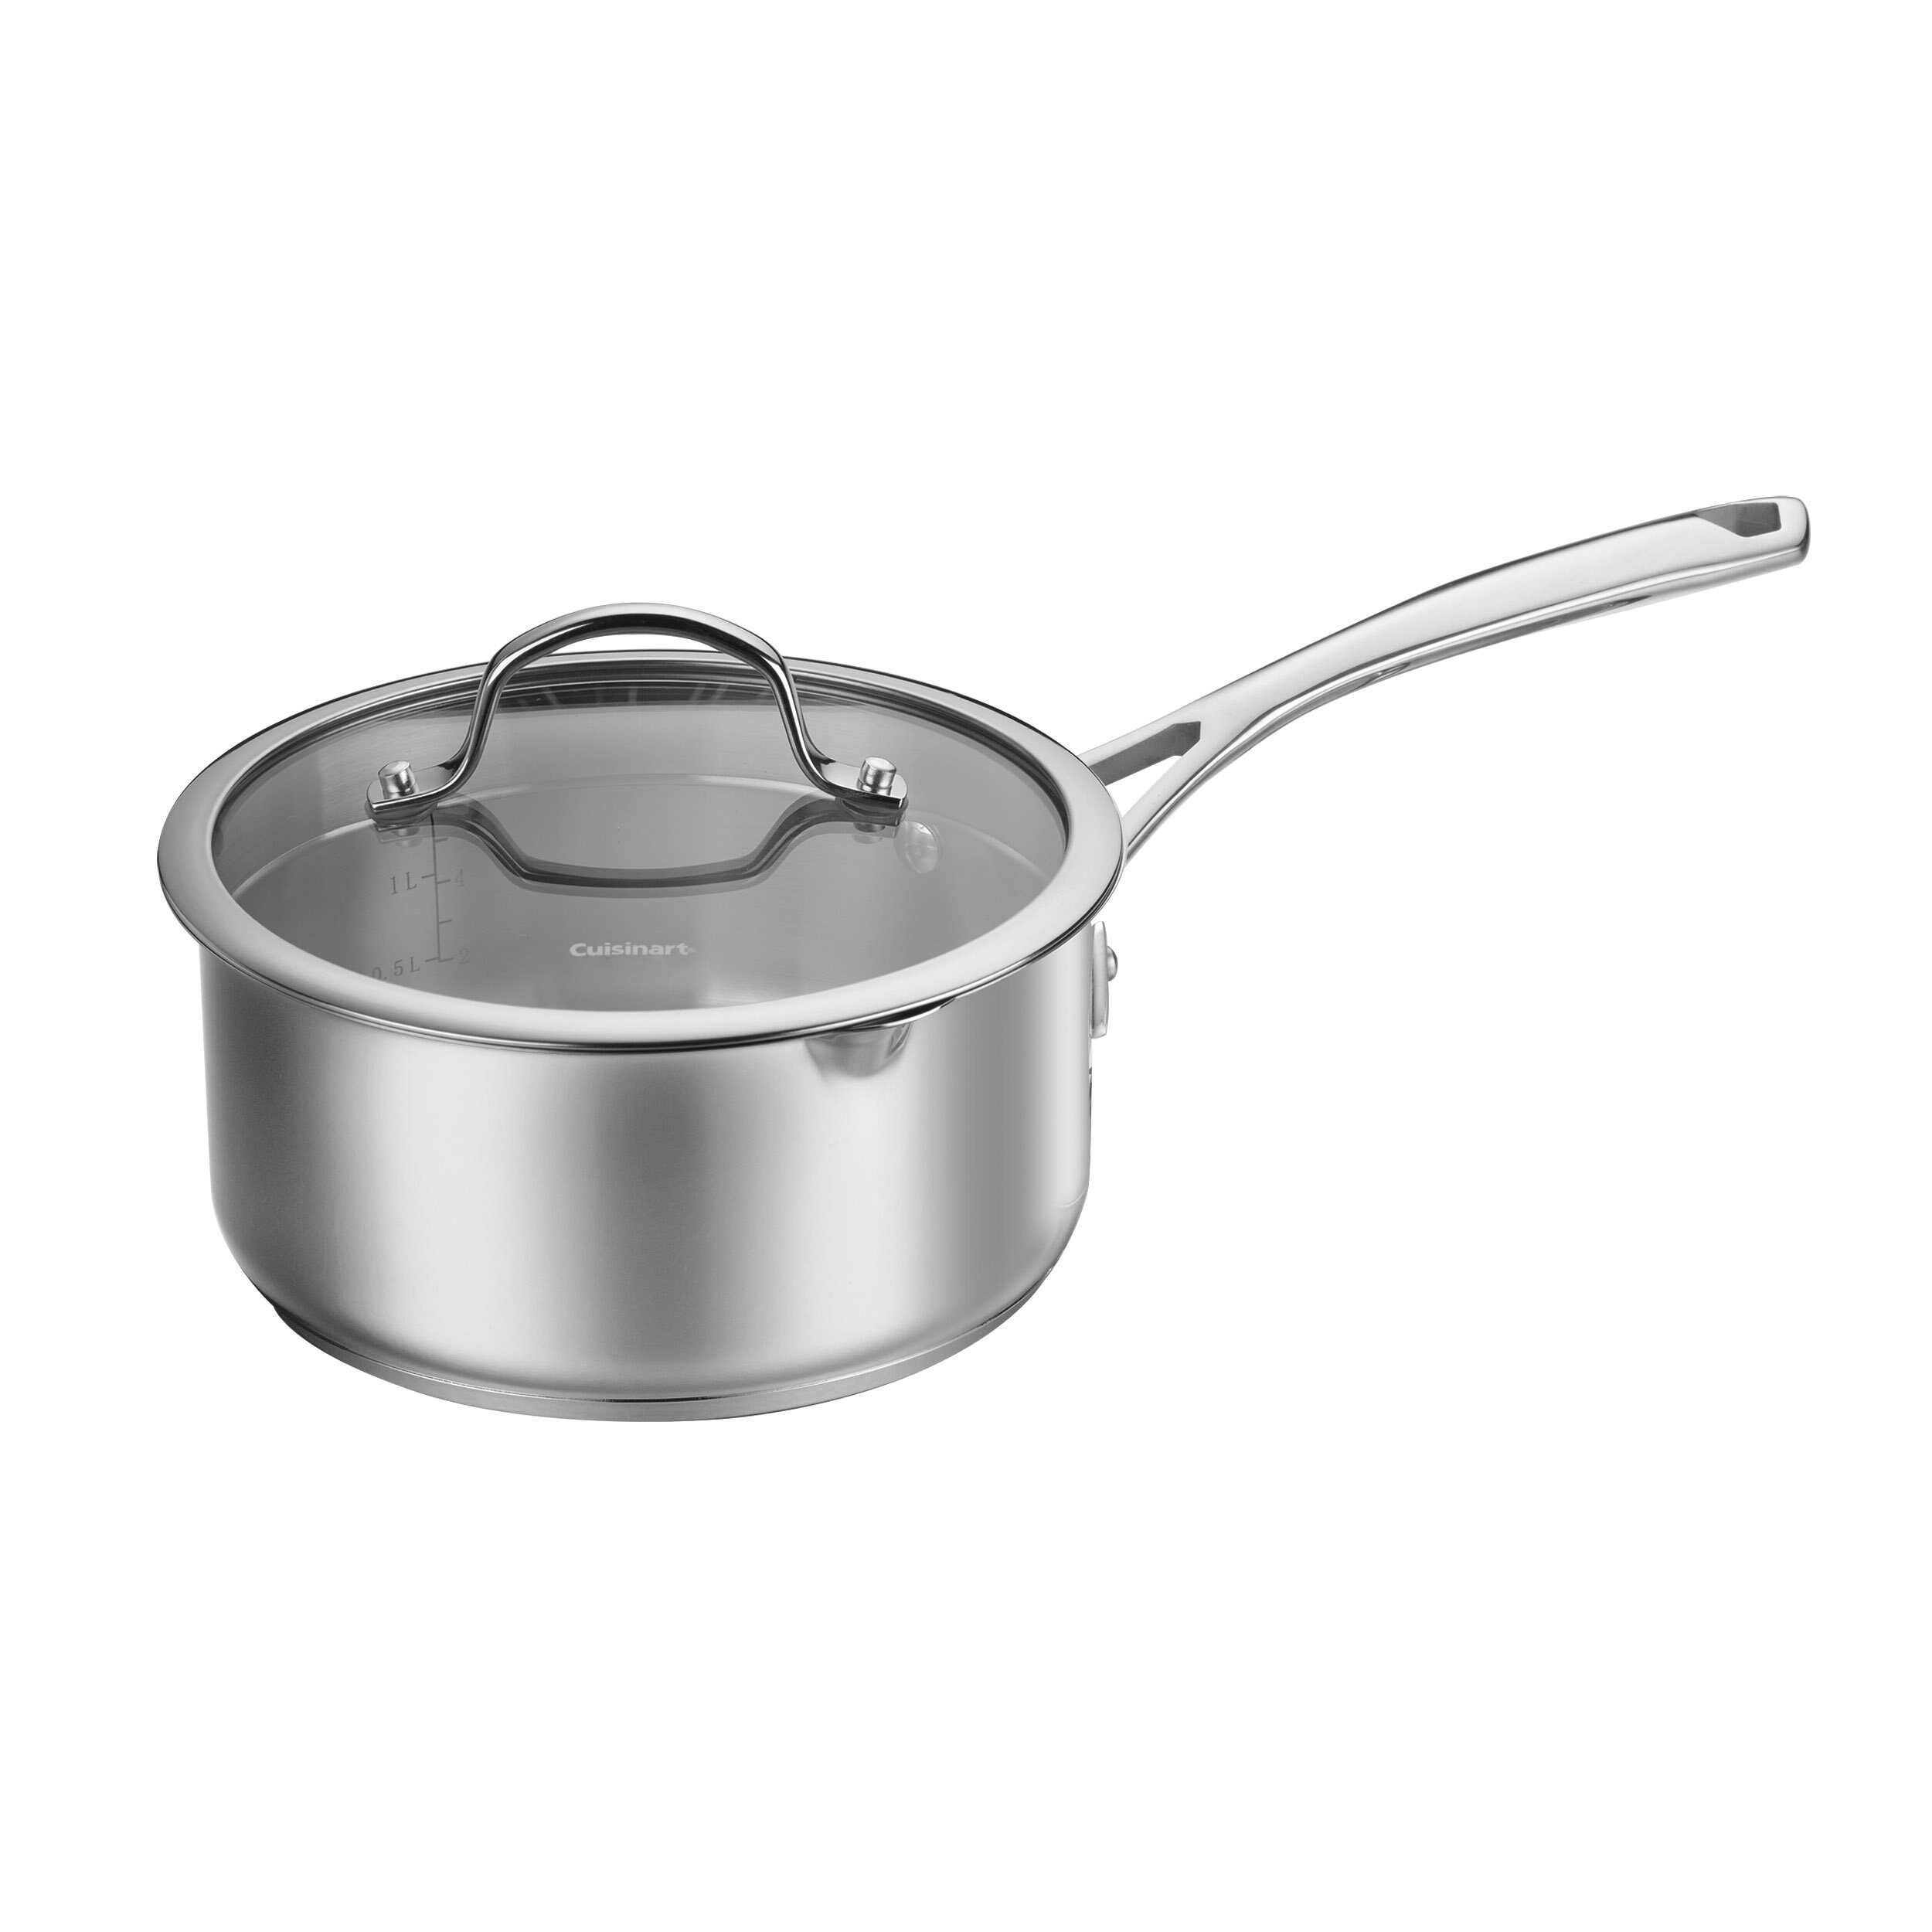 Cuisinart 2 qt. Non-Stick Stainless Steel Saucepan with Lid